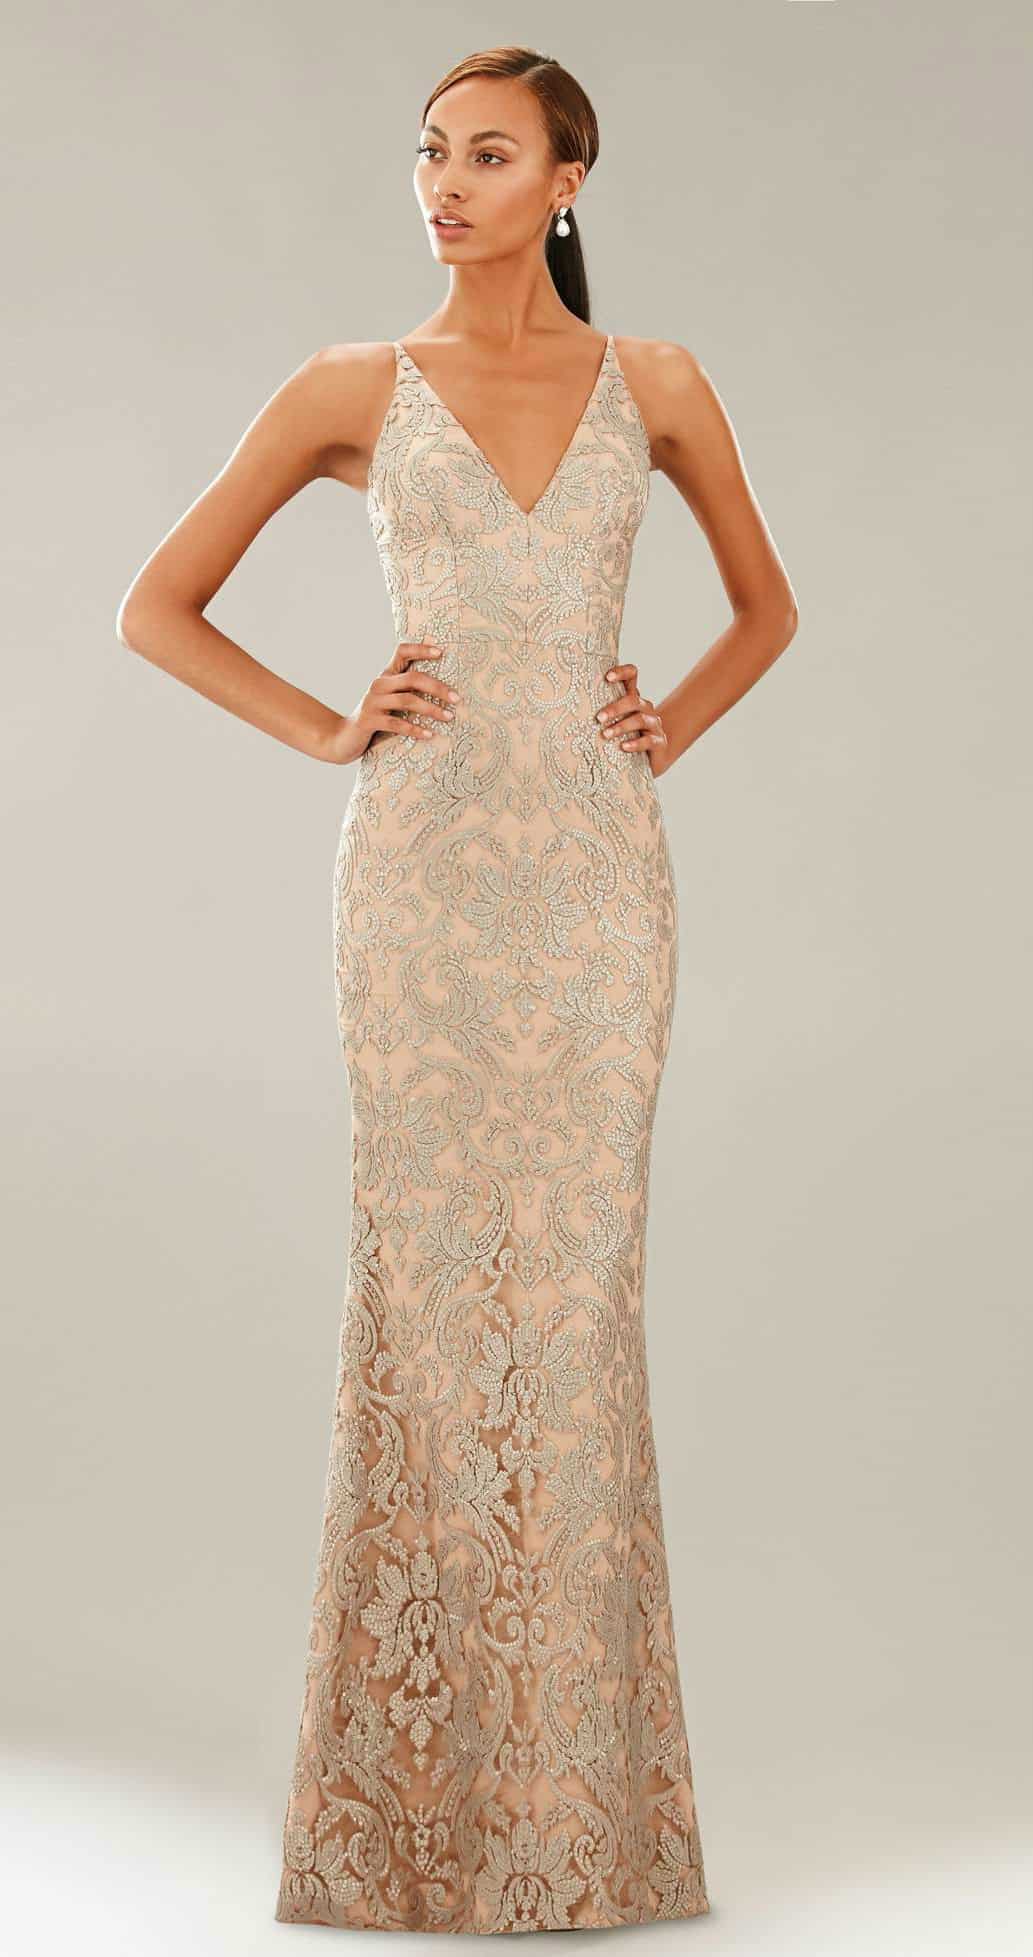 Ivory Lace Maxi Dress - Dress for the Wedding